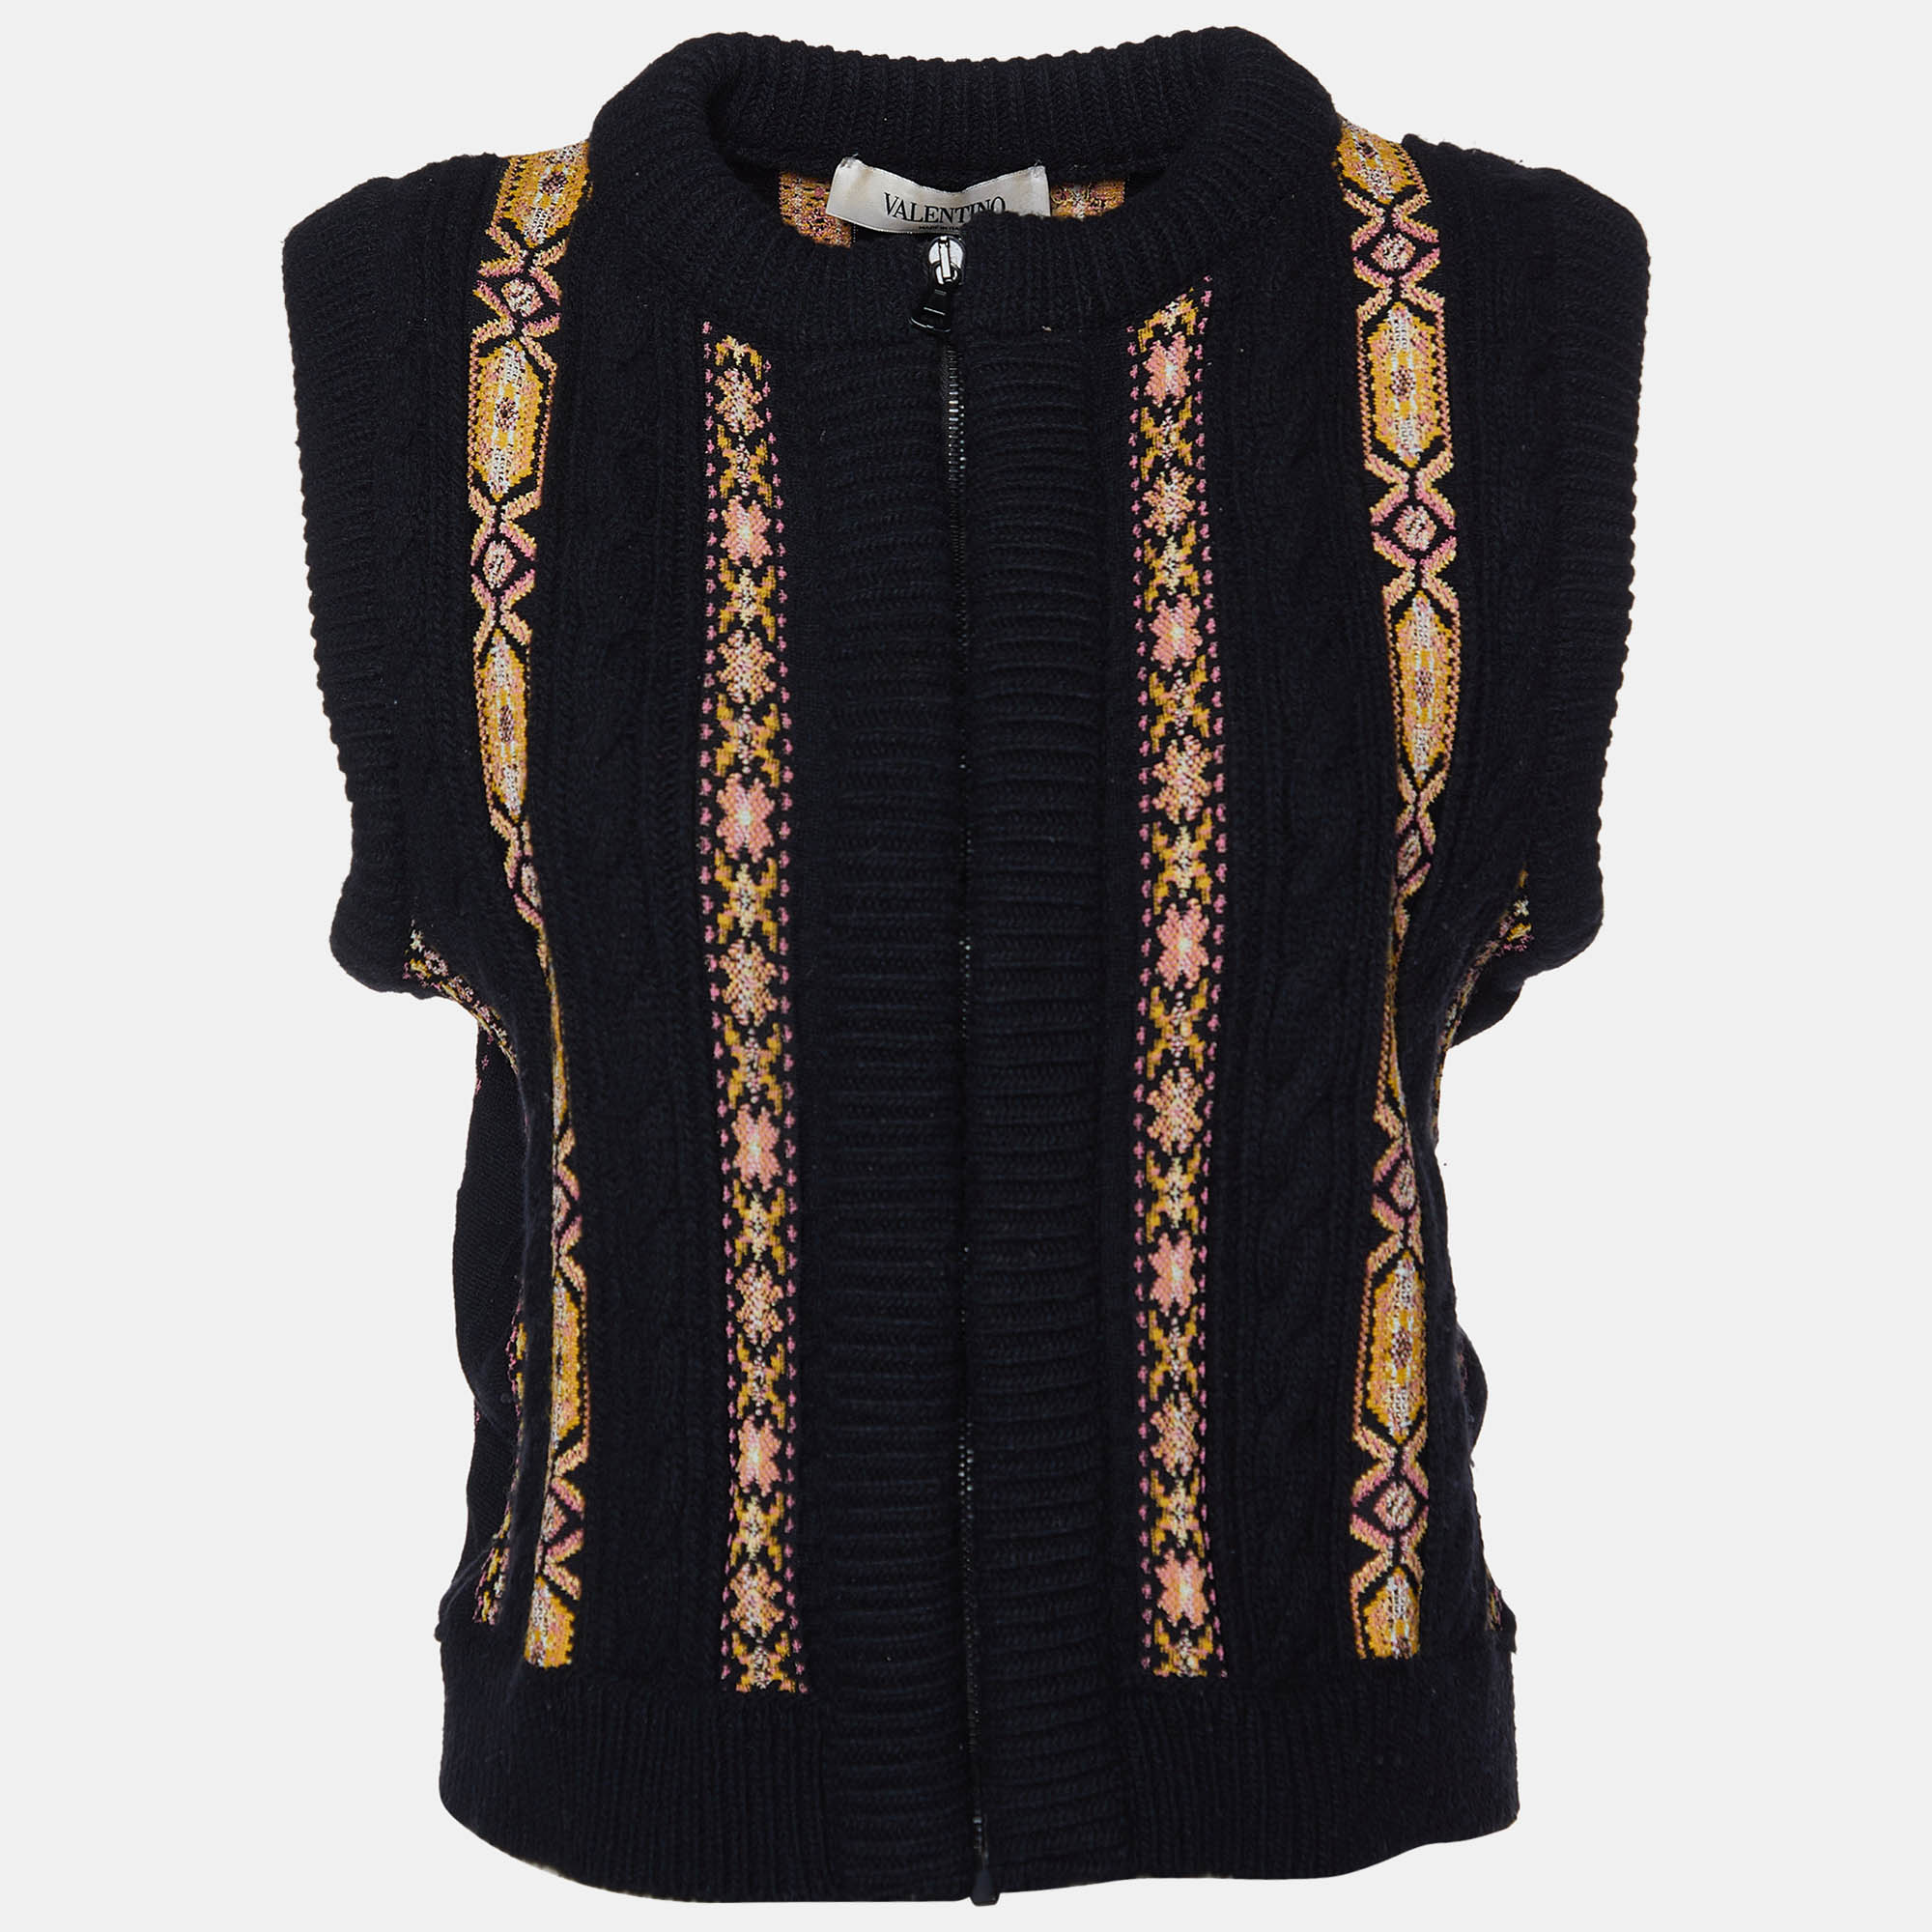 

Valentino Black Patterned Fleece Wool and Cashmere Zip Front Vest